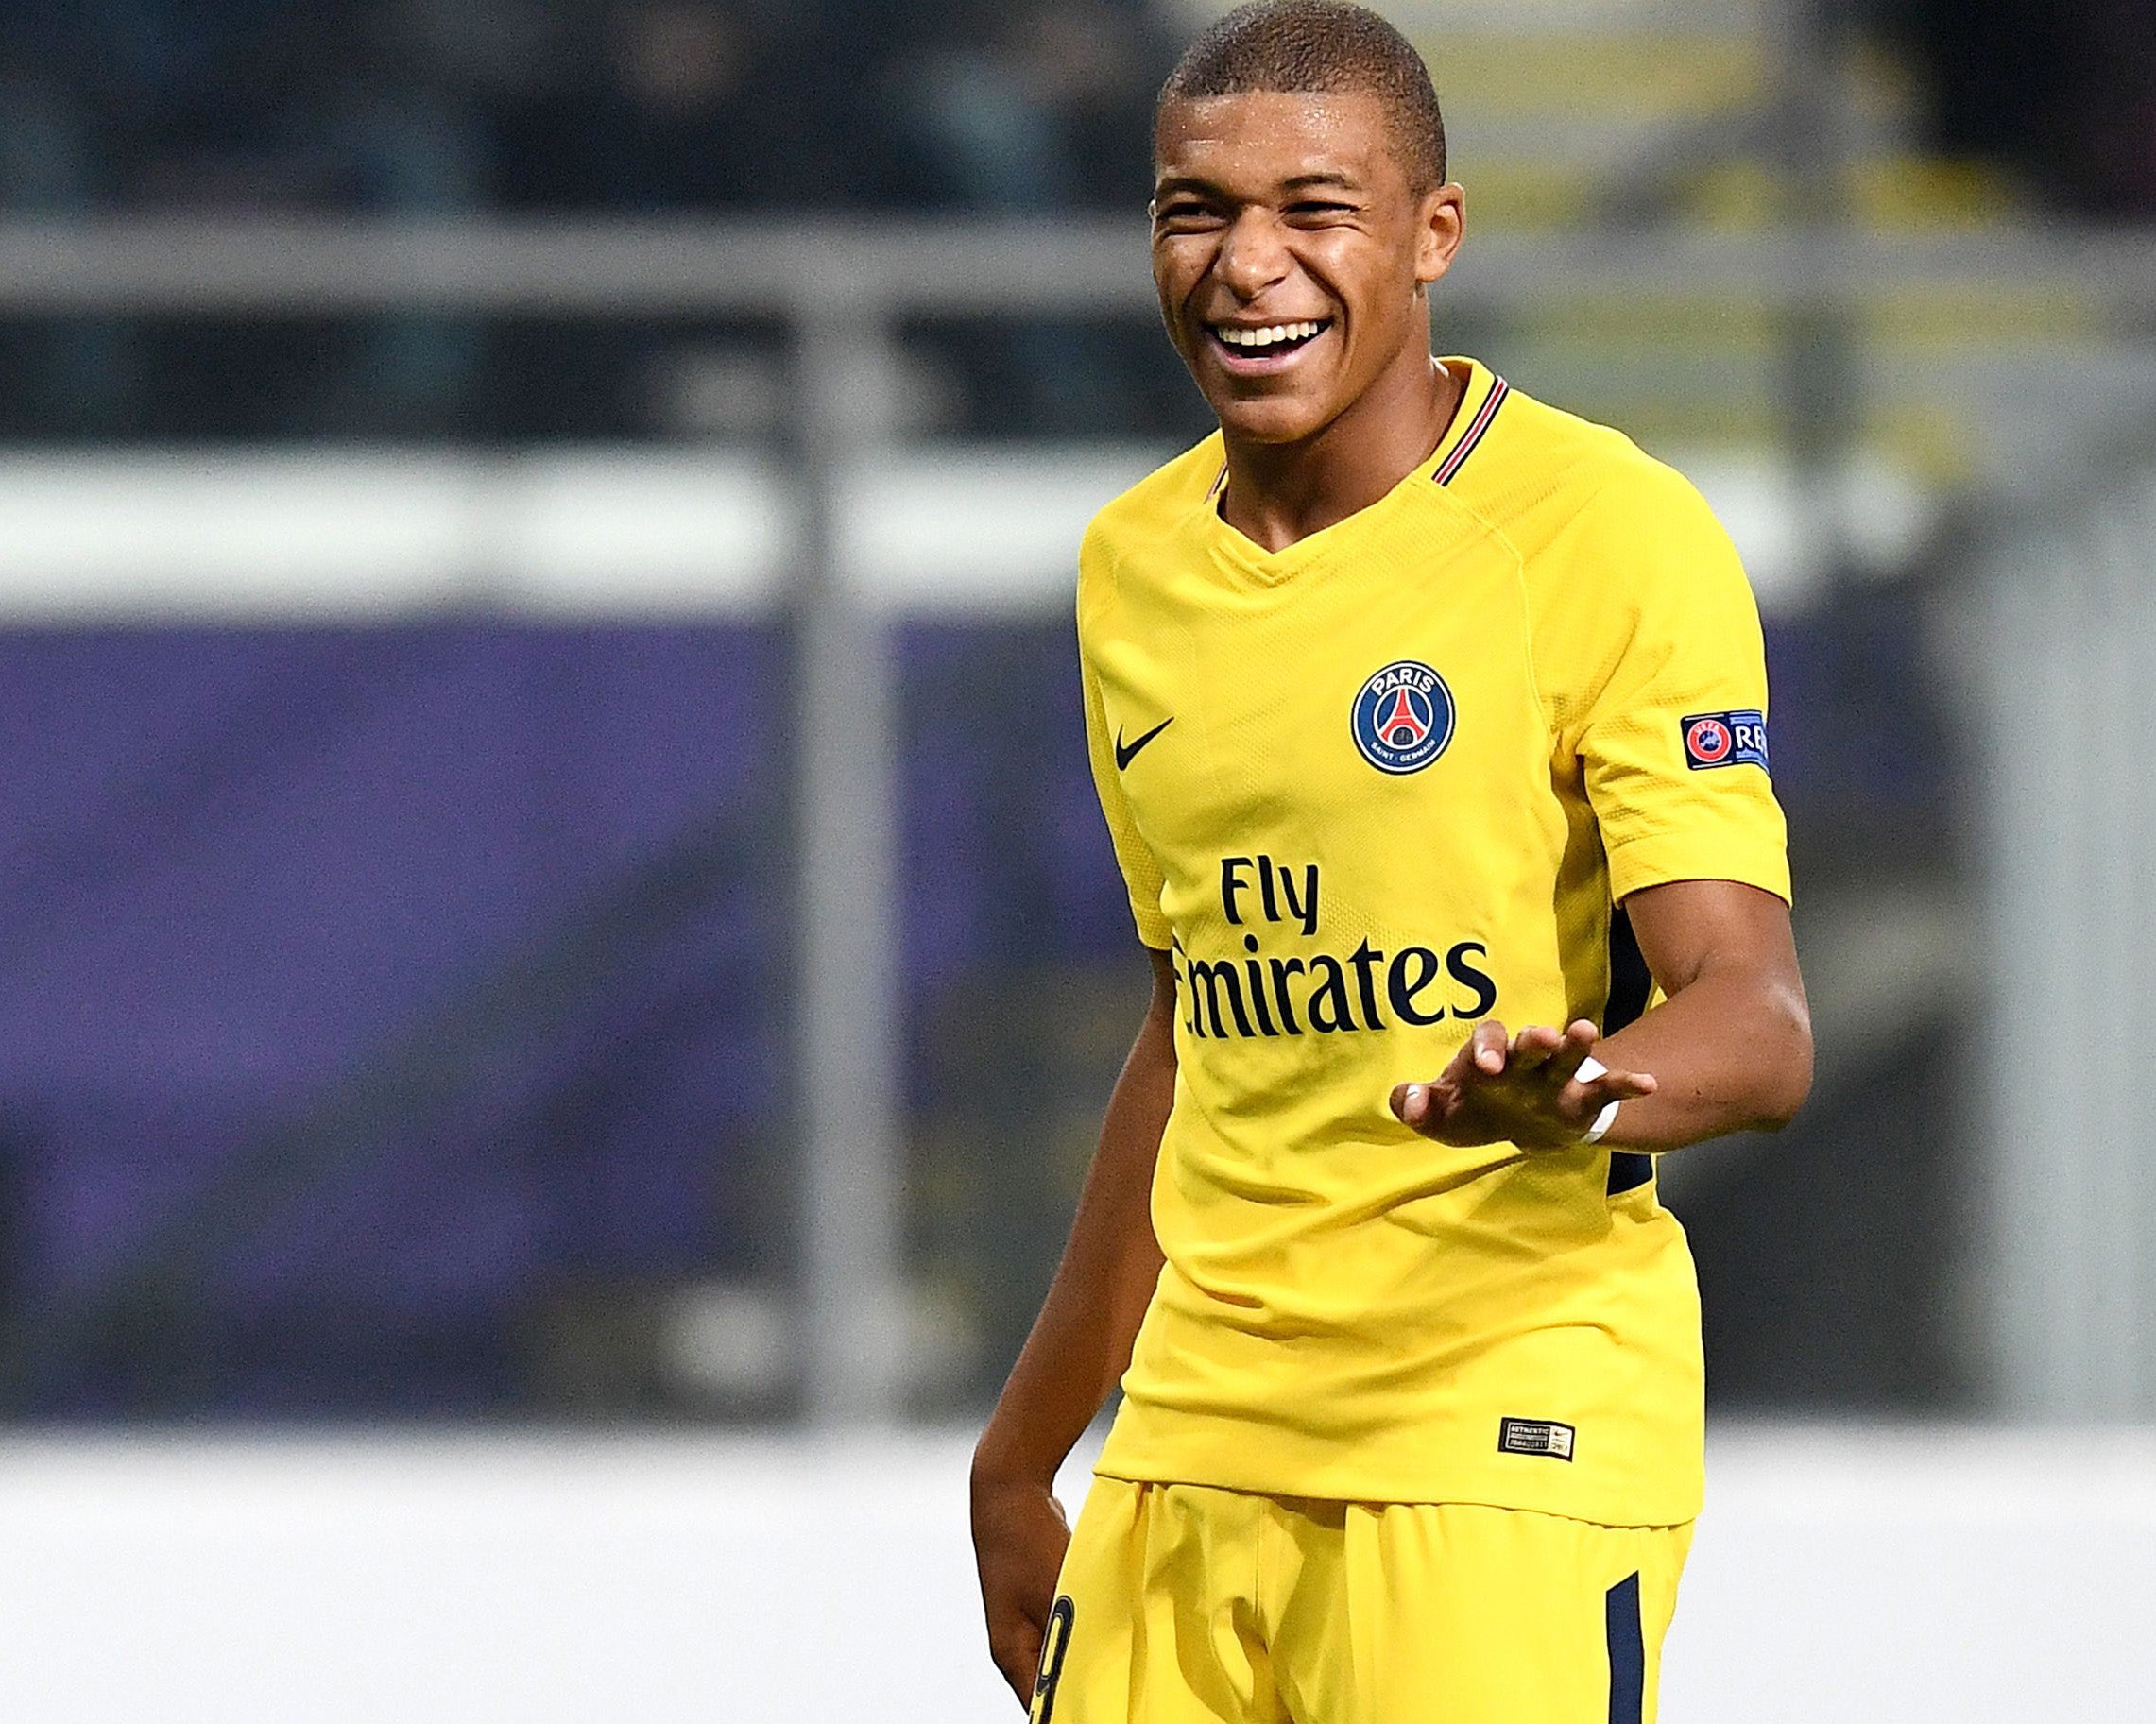 Kylian Mbappe Wins Golden Boy Award But Confusion Over Third Place As Marcus Rashford Beats Gabriel Jesus The Independent The Independent